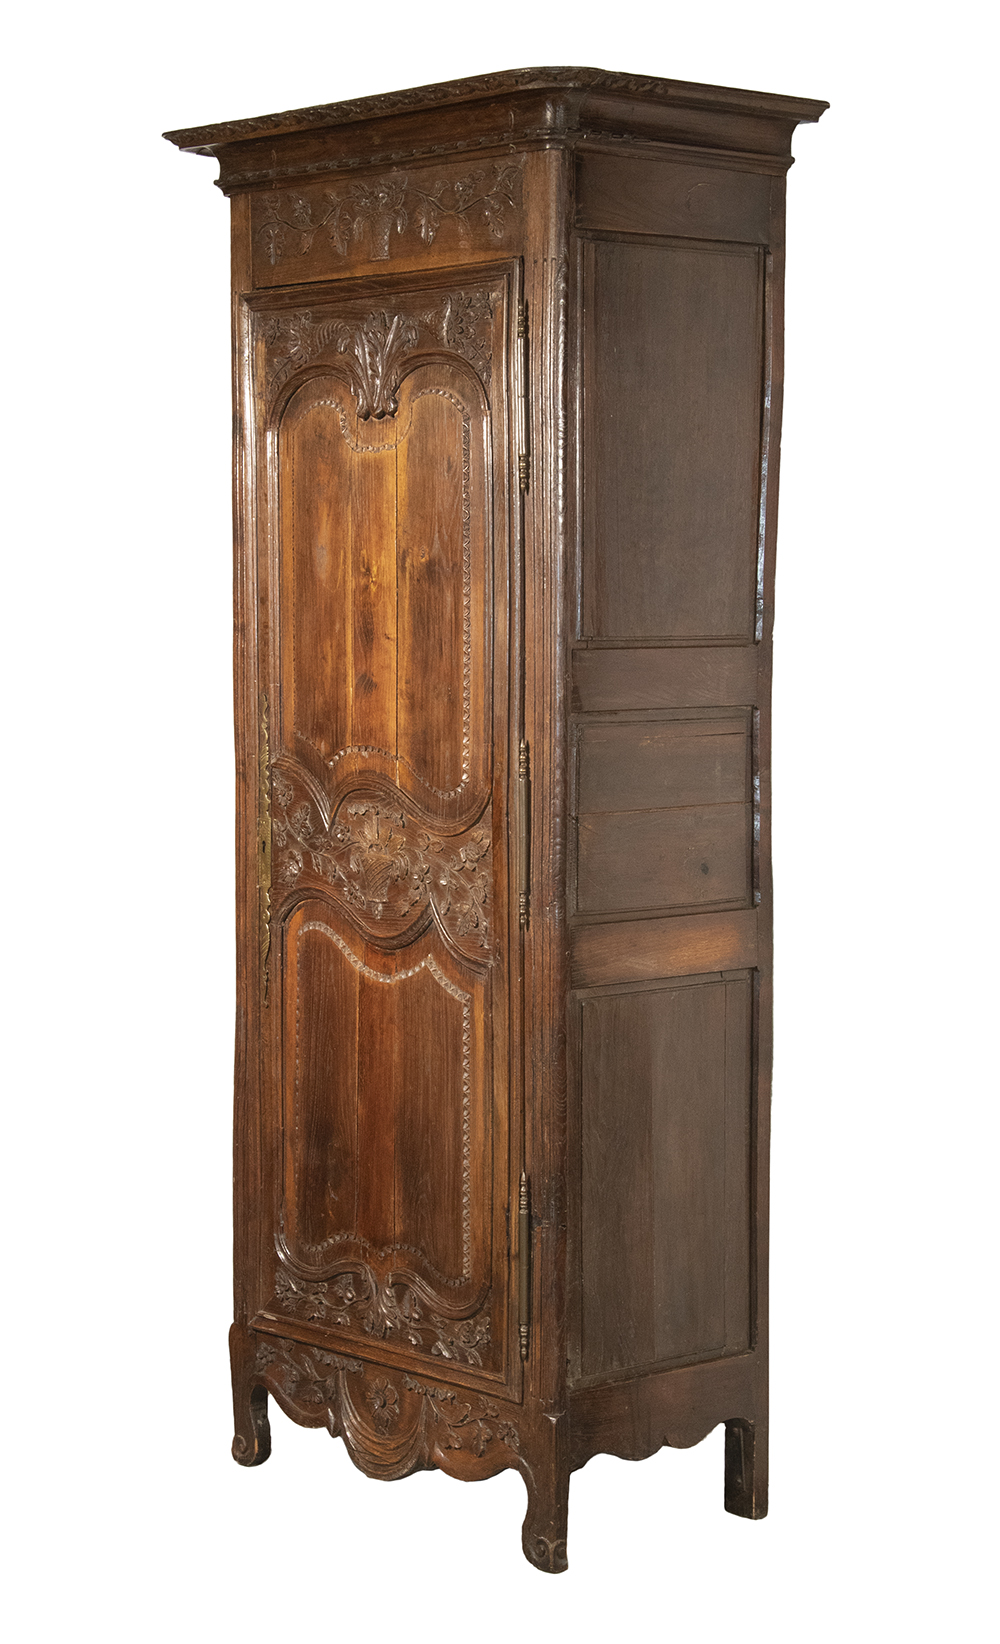 CARVED FRENCH CUPBOARD 18th c.